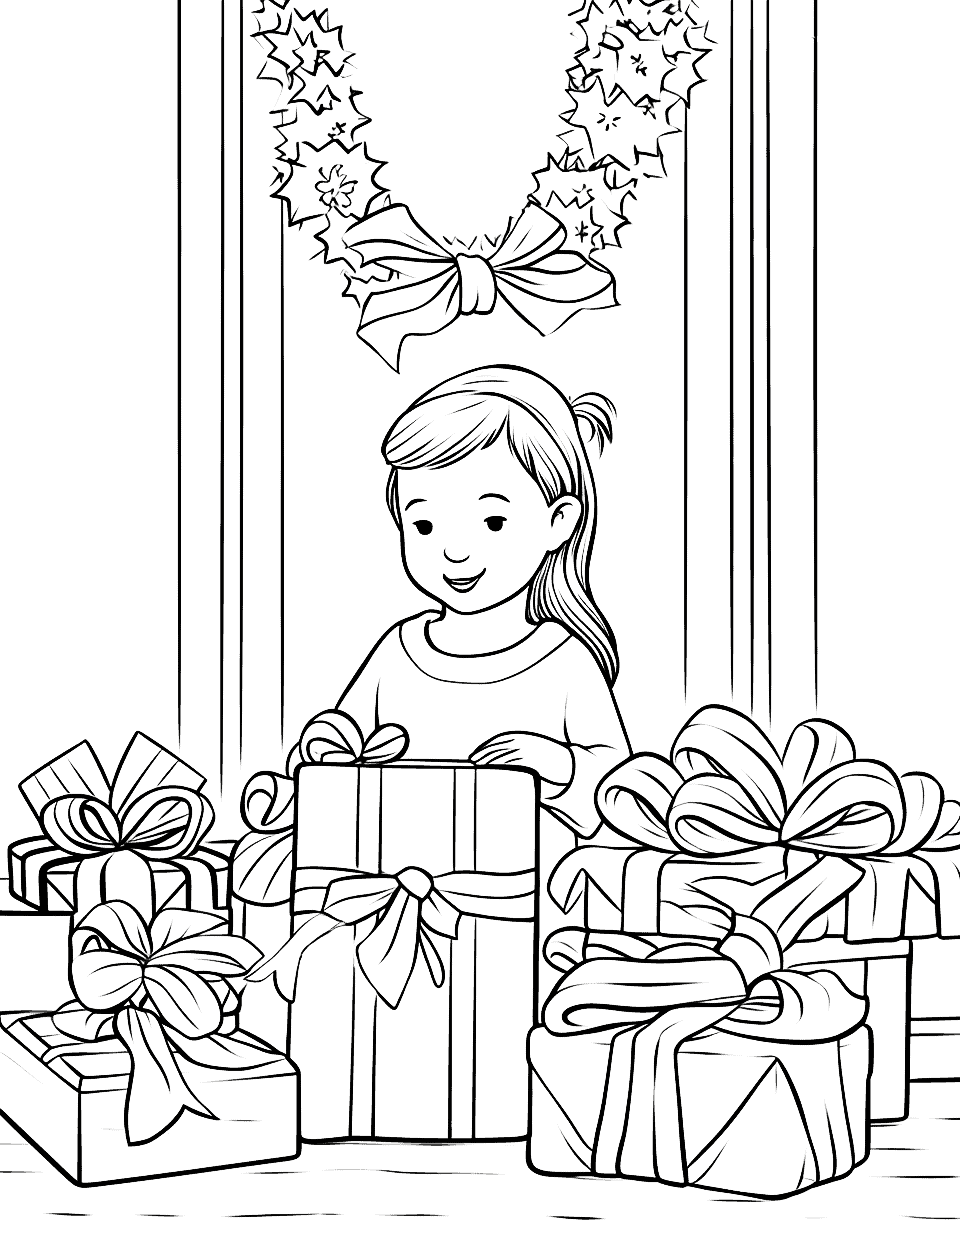 Gift Wrapping Station Christmas Coloring Page - A busy gift-wrapping station with rolls of wrapping paper and colorful ribbons.